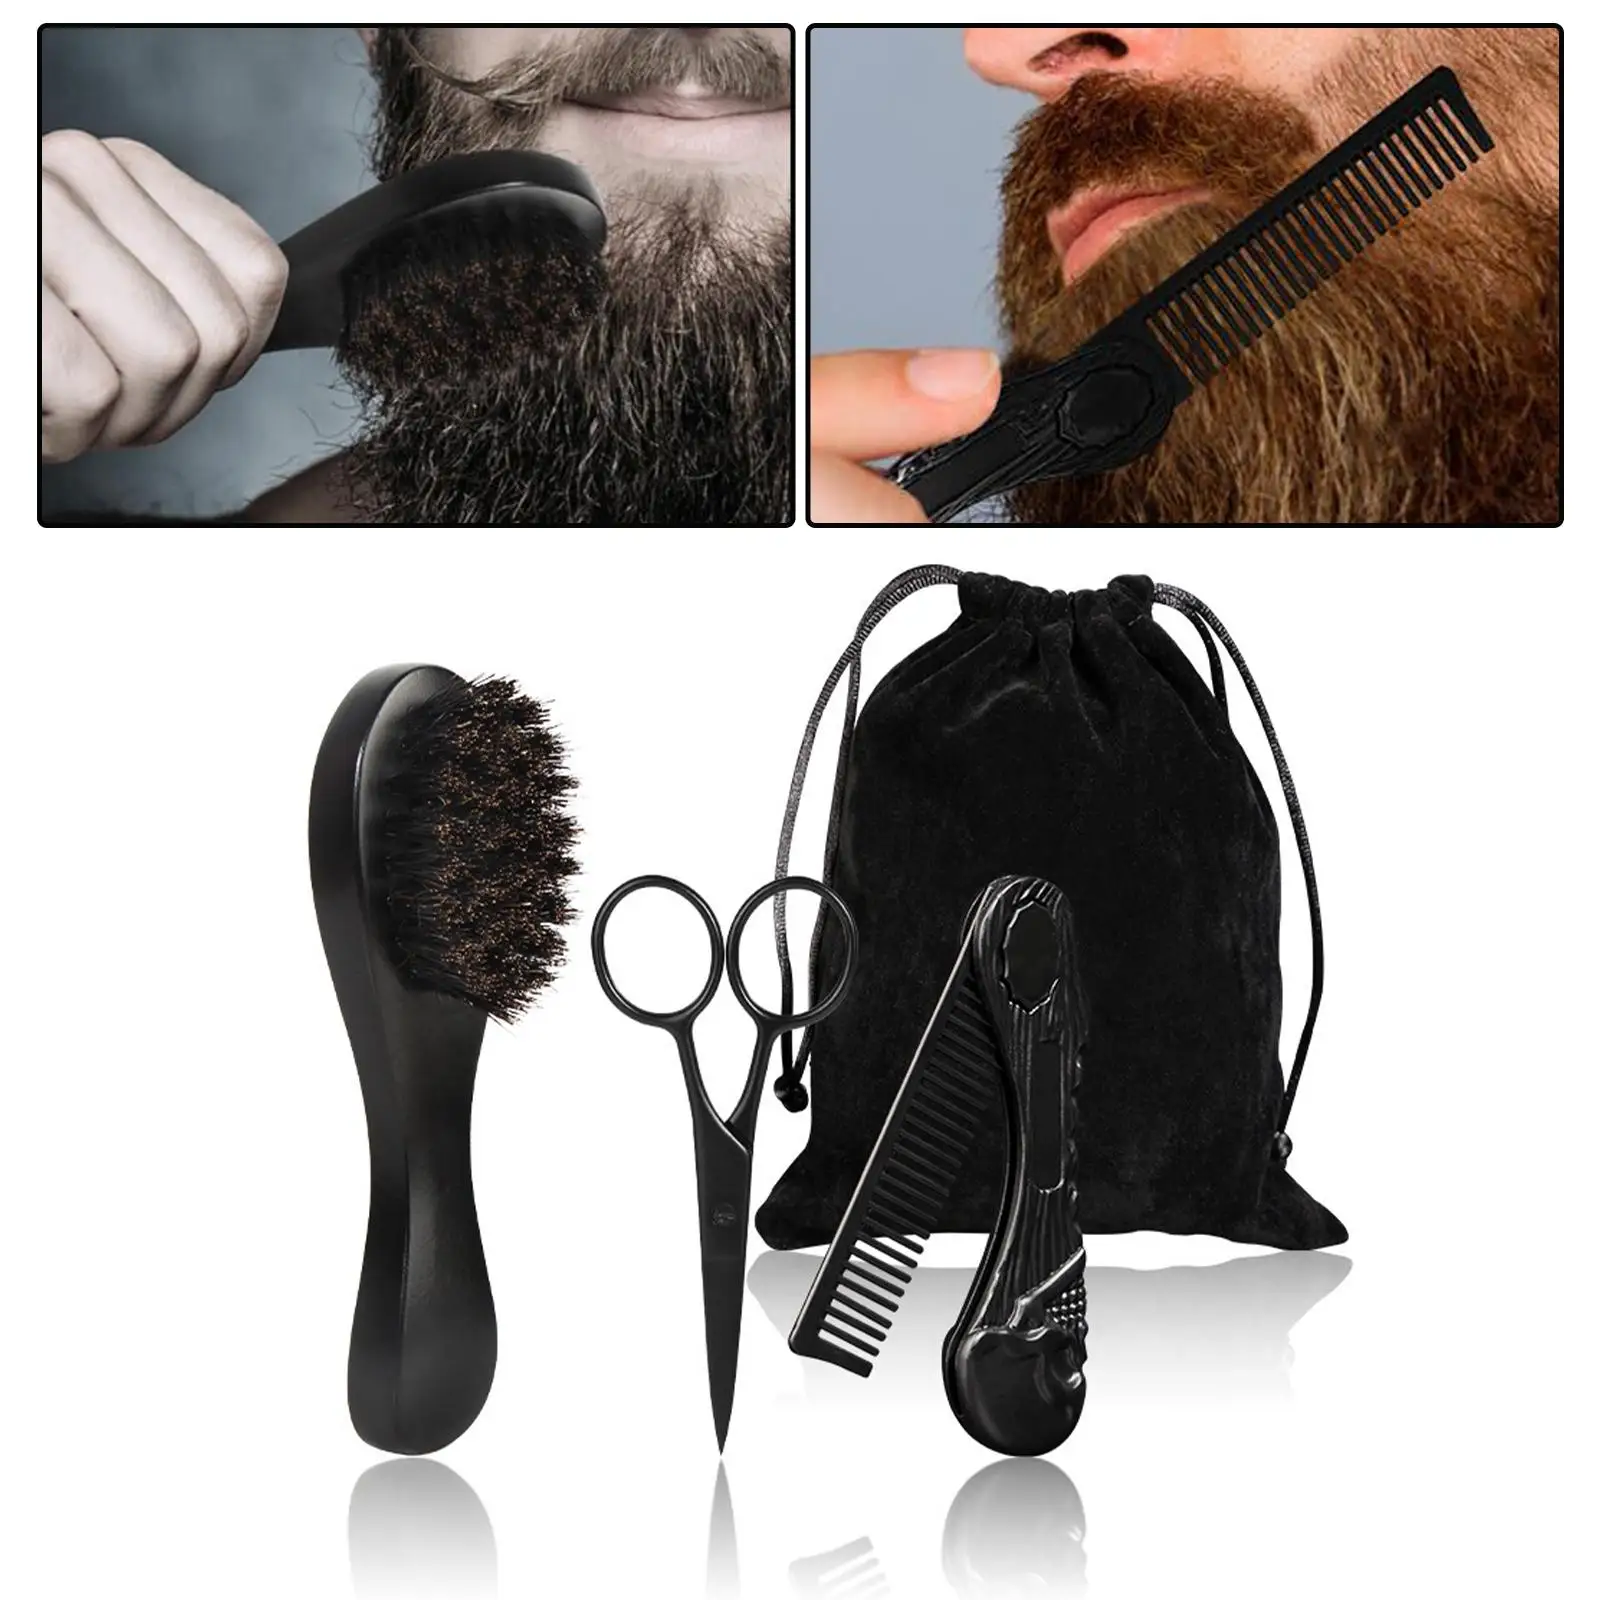 3 Pieces Beard Care Kit Folding Comb for Home Cleaning Grooming Tool Beard Grooming Kit